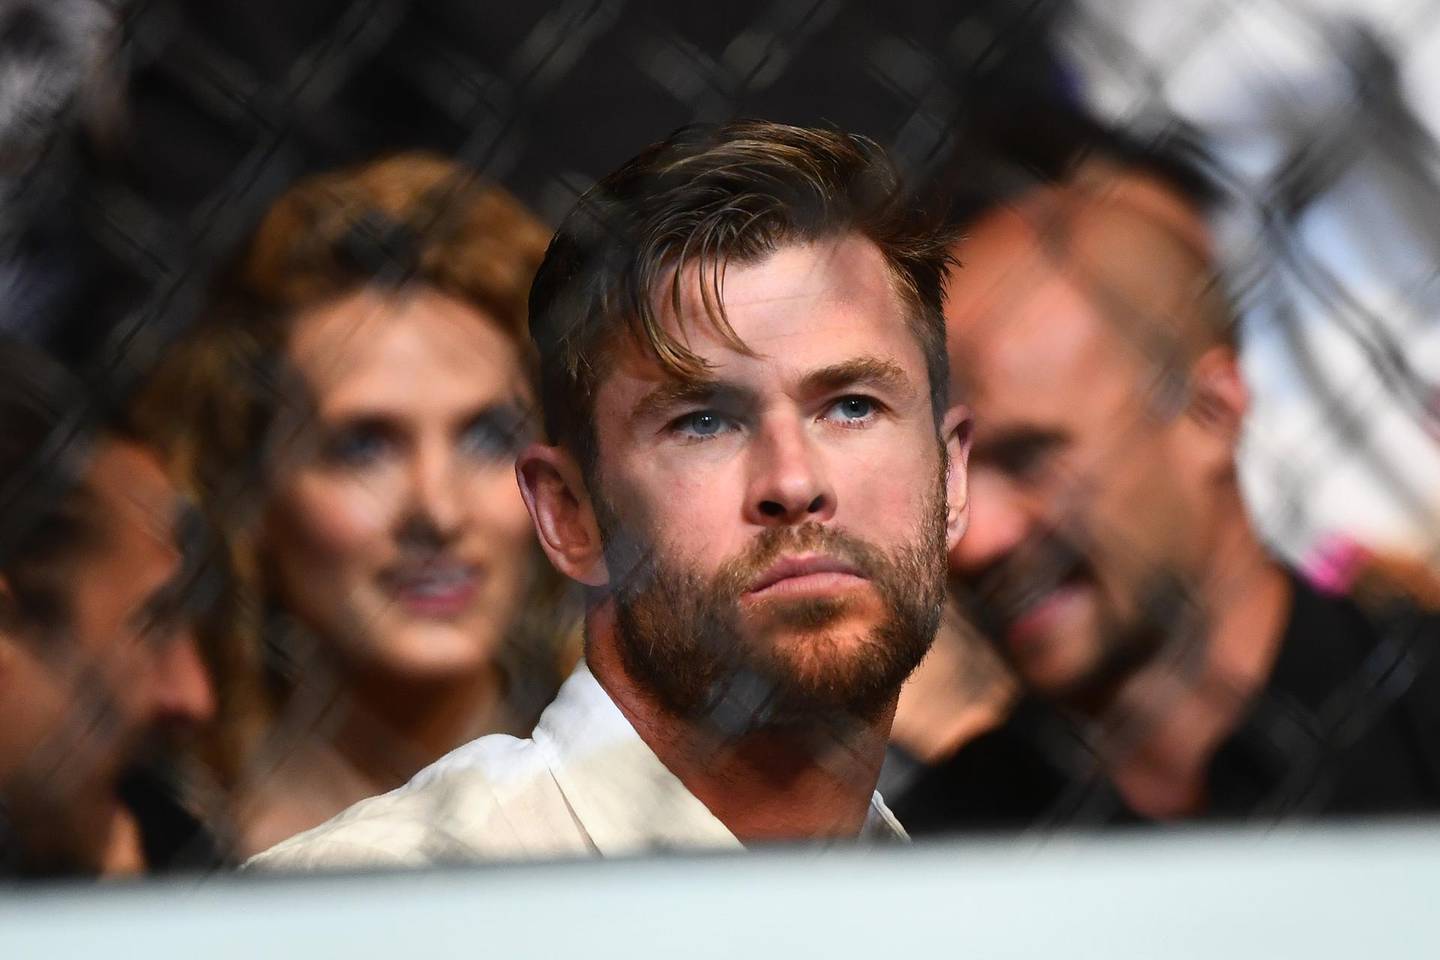 MELBOURNE, AUSTRALIA - FEBRUARY 10: Chris Hemsworth sits ringside during UFC234 at Rod Laver Arena on February 10, 2019 in Melbourne, Australia. (Photo by Quinn Rooney/Getty Images)